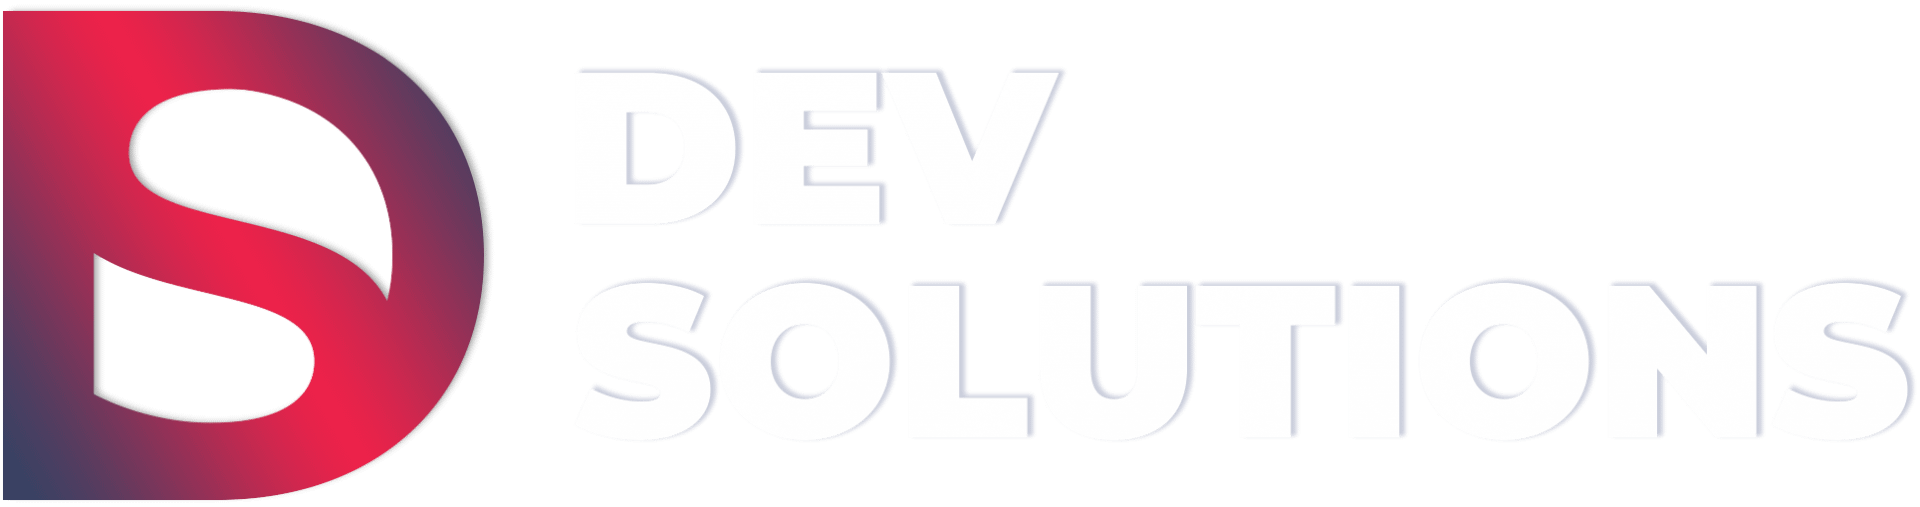 DevSolutions